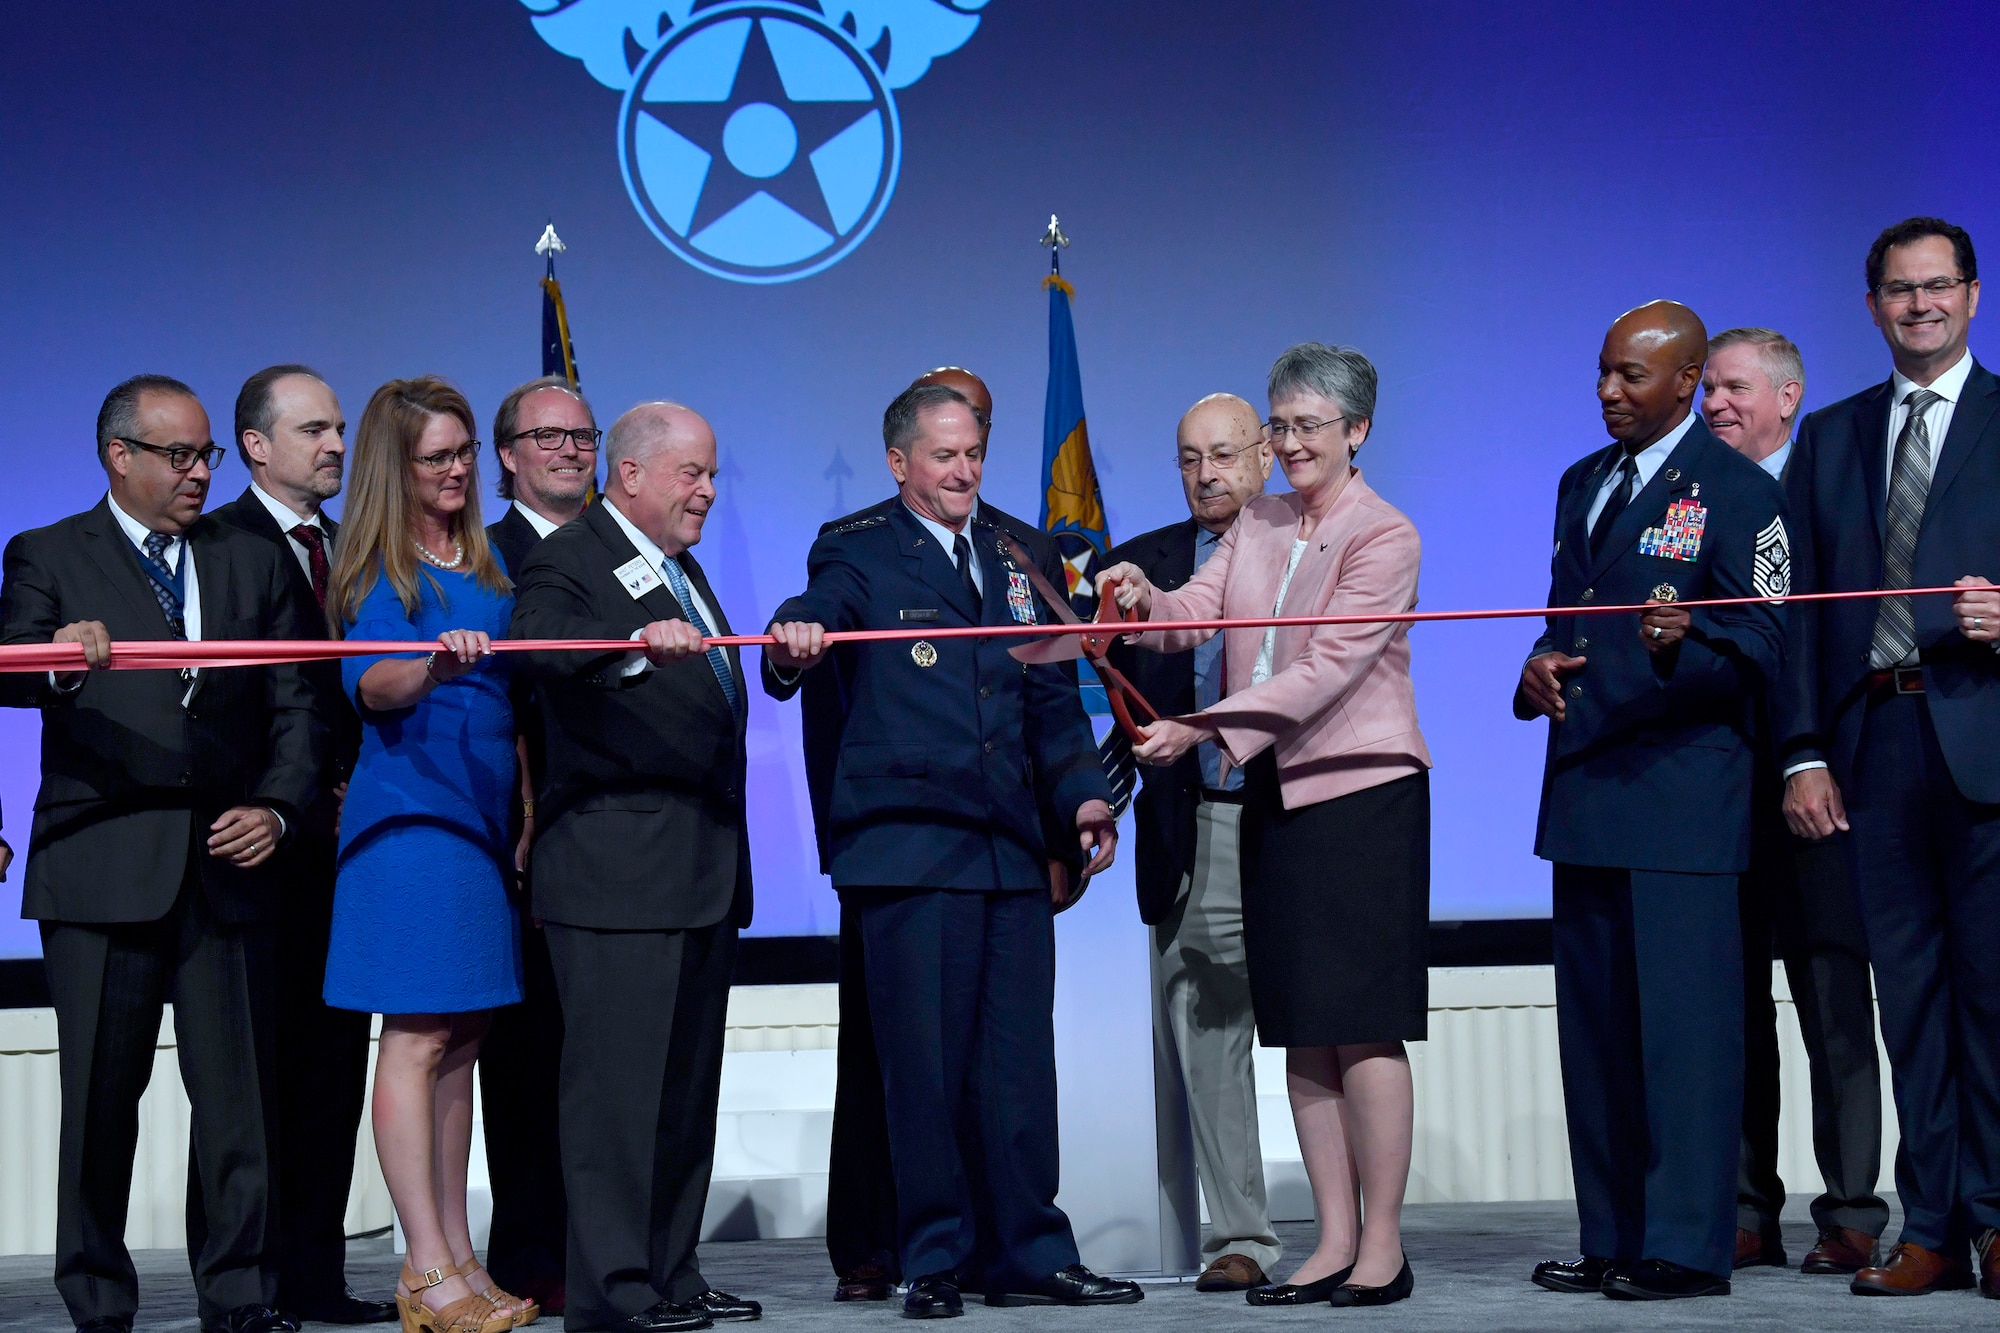 Secretary of the Air Force Heather Wilson, Air Force Chief of Staff Gen. David L. Goldfein, Chief Master Sgt. of the Air Force Kaleth O. Wright and Air Force Association leadership cut a ribbon during the 2018 AFA Air, Space and Cyber Conference in National Harbor, Md., Sept. 17, 2018. Cutting the ribbon symbolized the opening of the conference's exhibition hall. (U.S. Air Force photo by Wayne Clark)